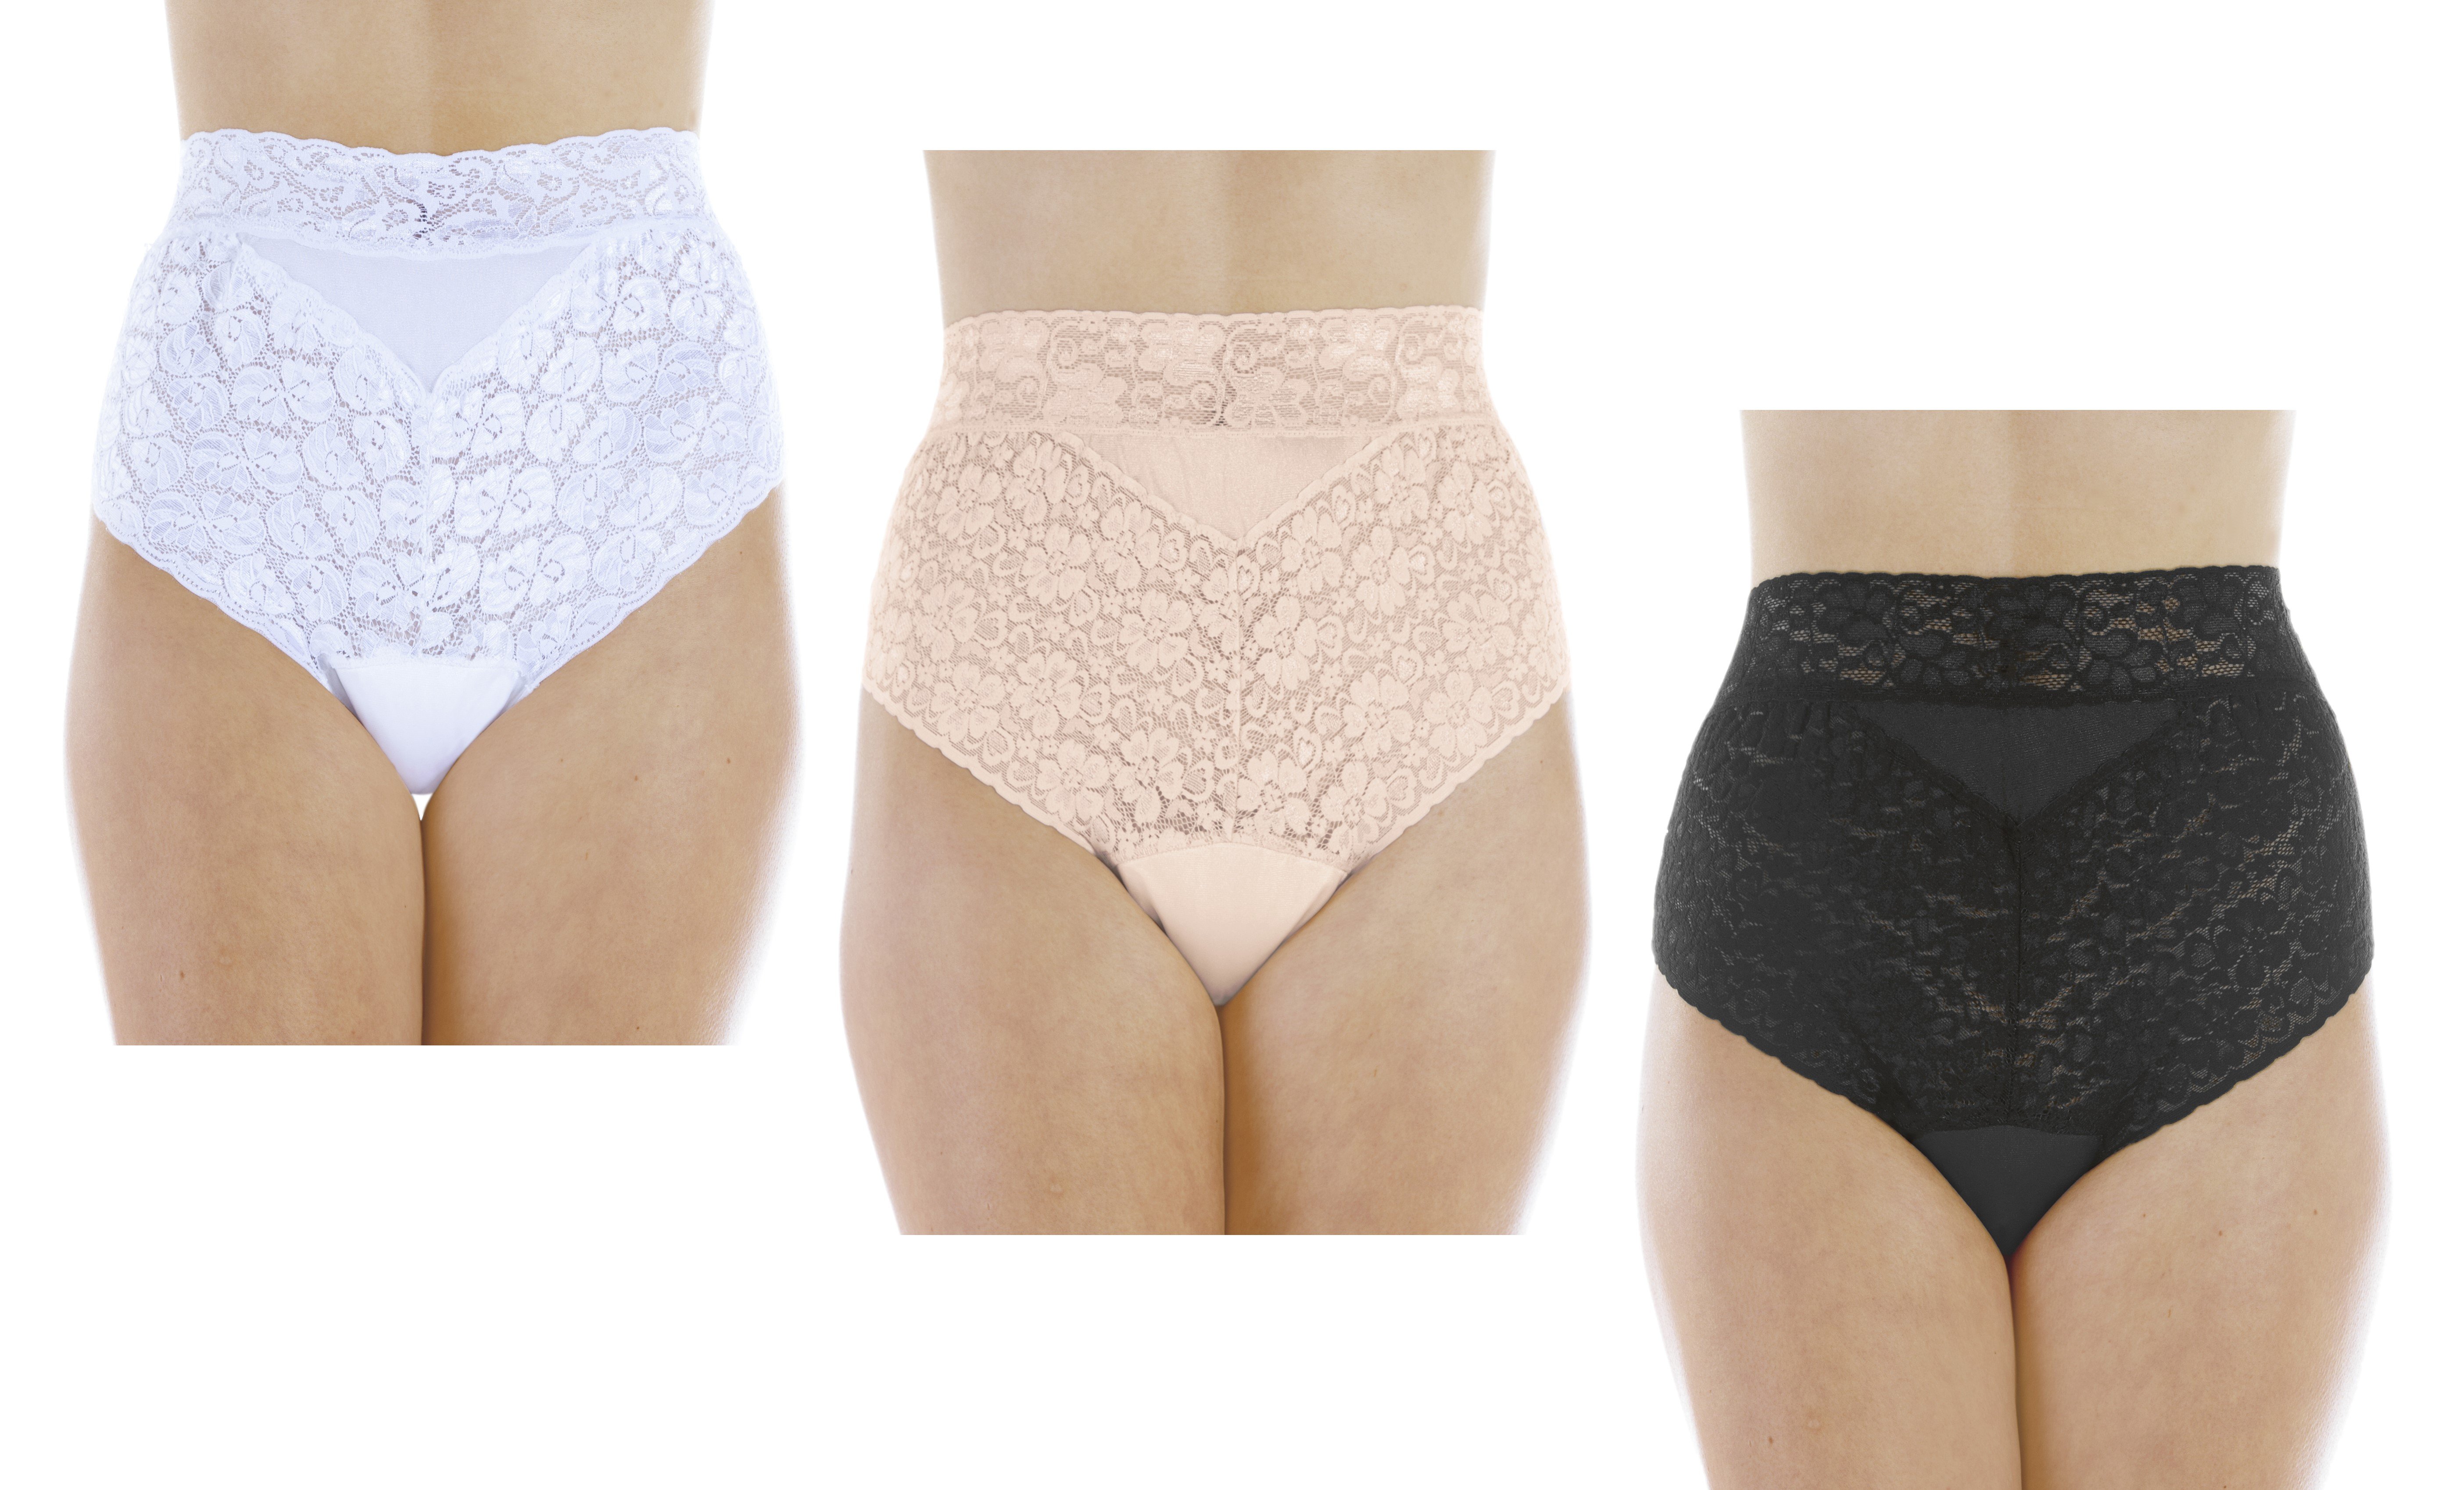 Lovely Lace Underwear in white, beige and black